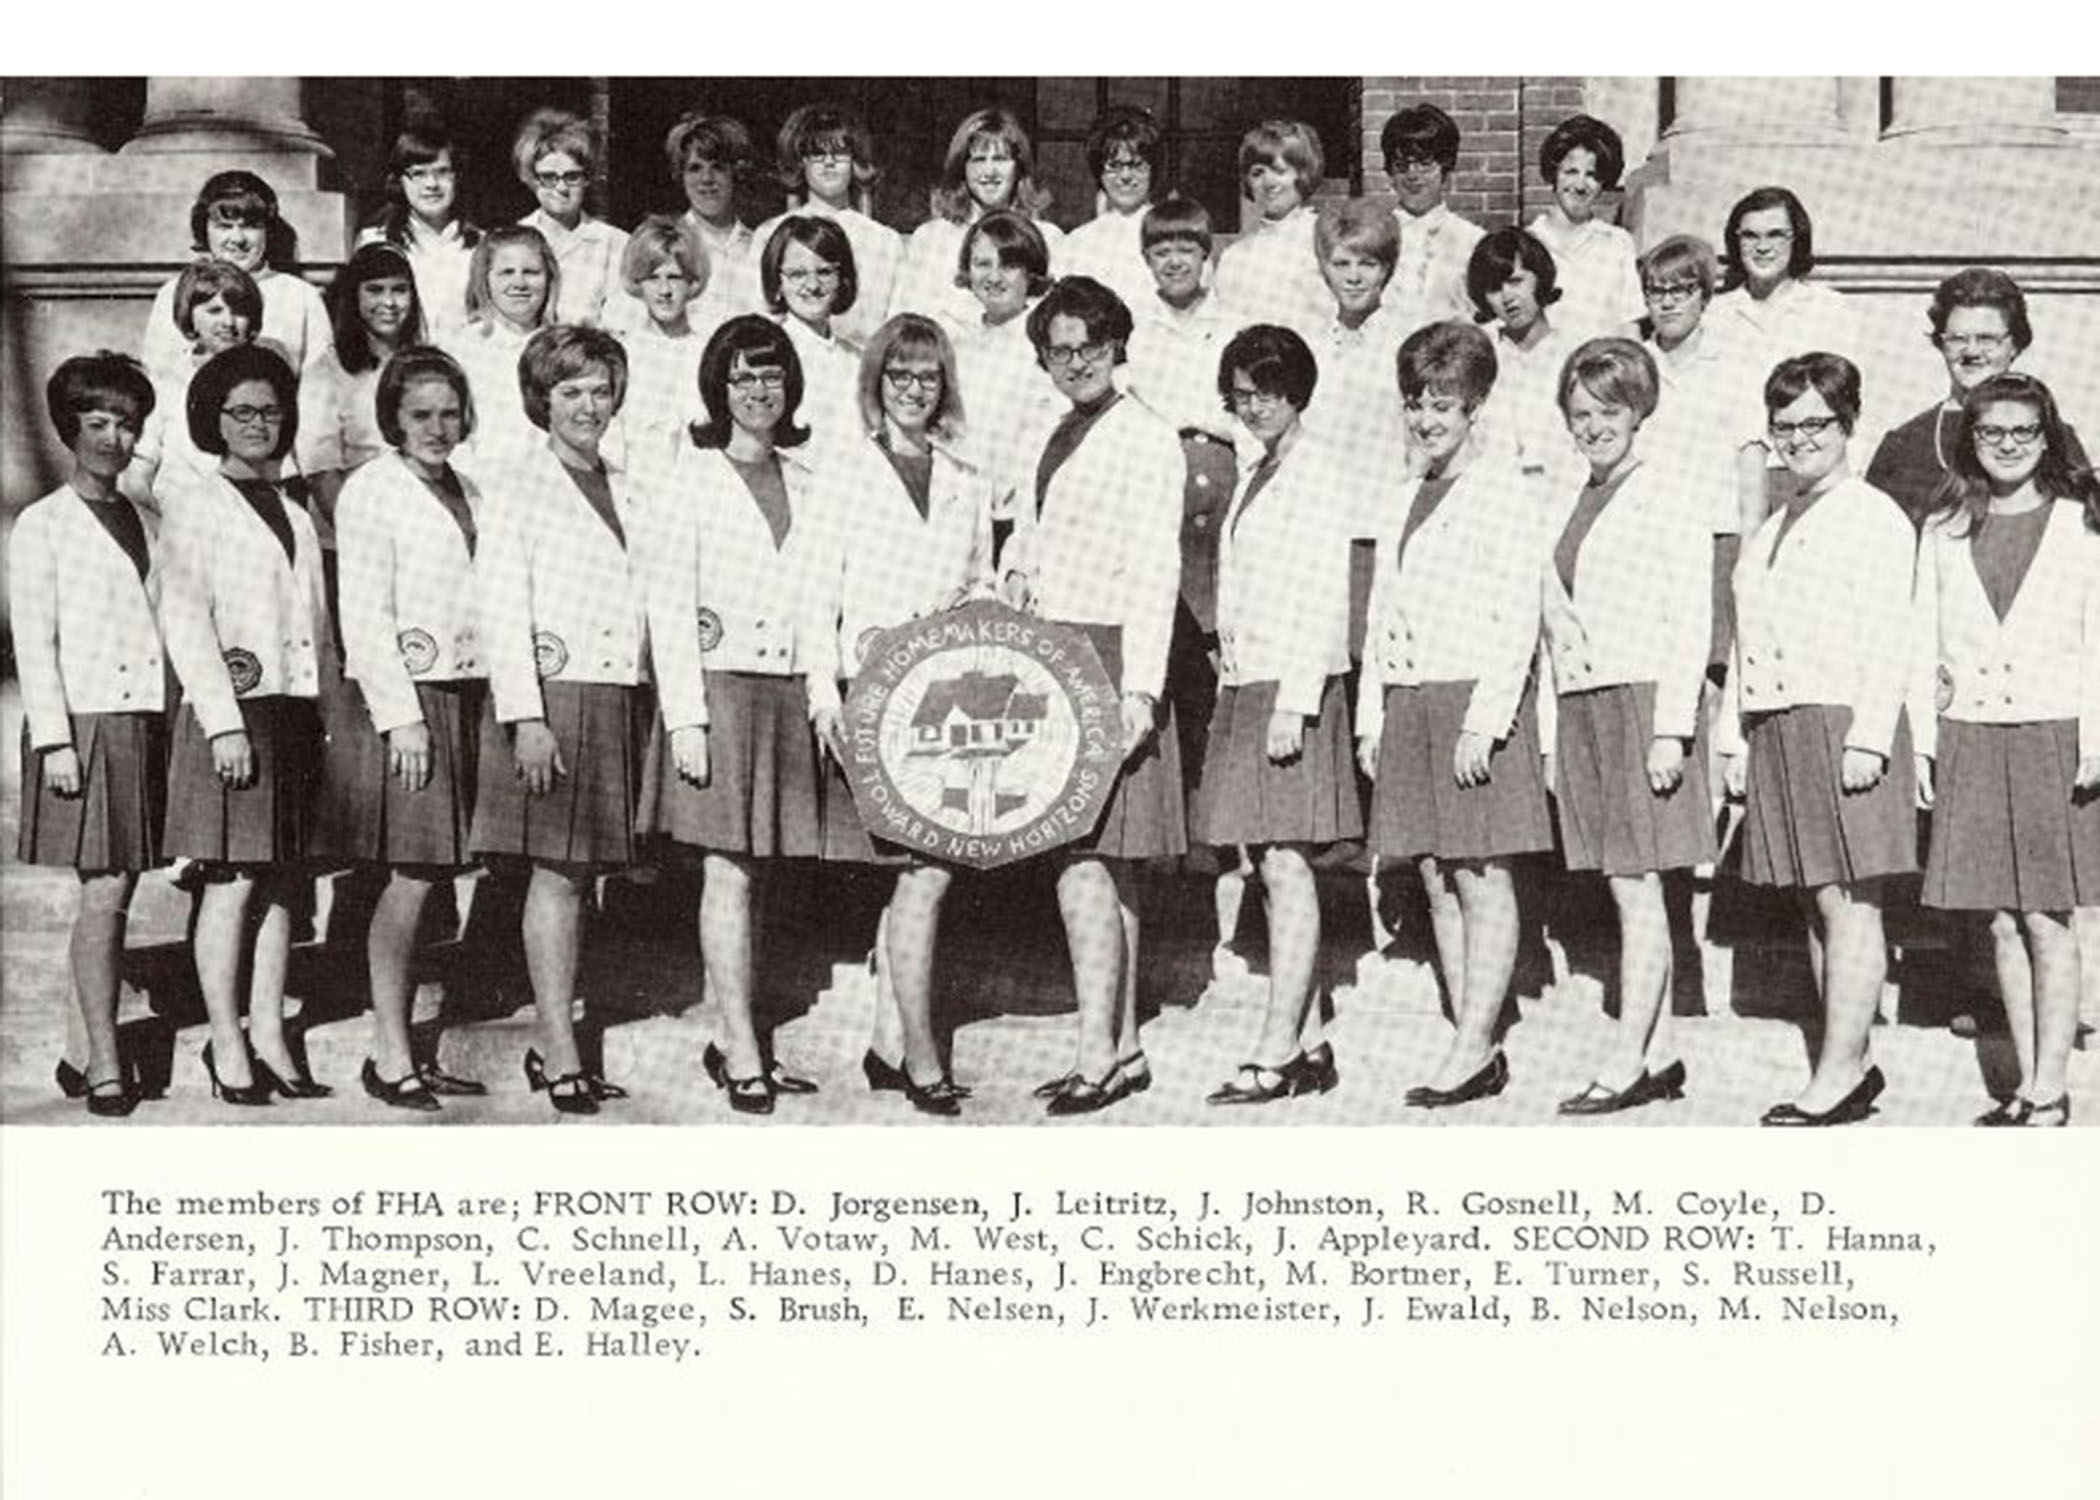 In 1967-68, Future Homemakers of America (FHA) was one of the largest campus clubs for young women at the University of Nebraska School of Agriculture. (UNSA '68 Aggie Yearbook).